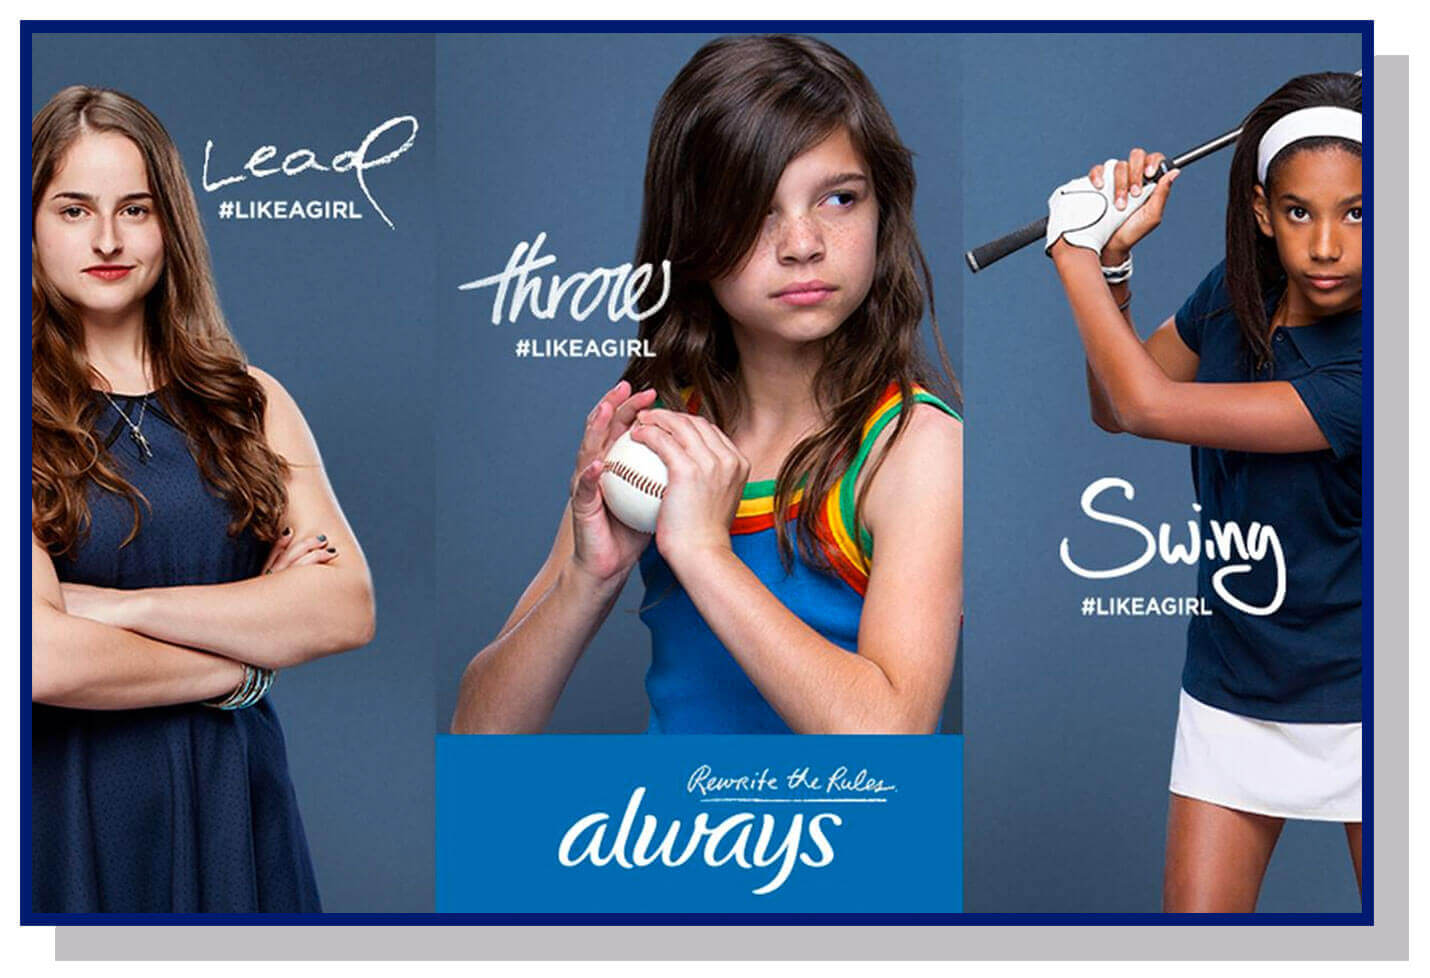 always like a girl campaign for emotional branding